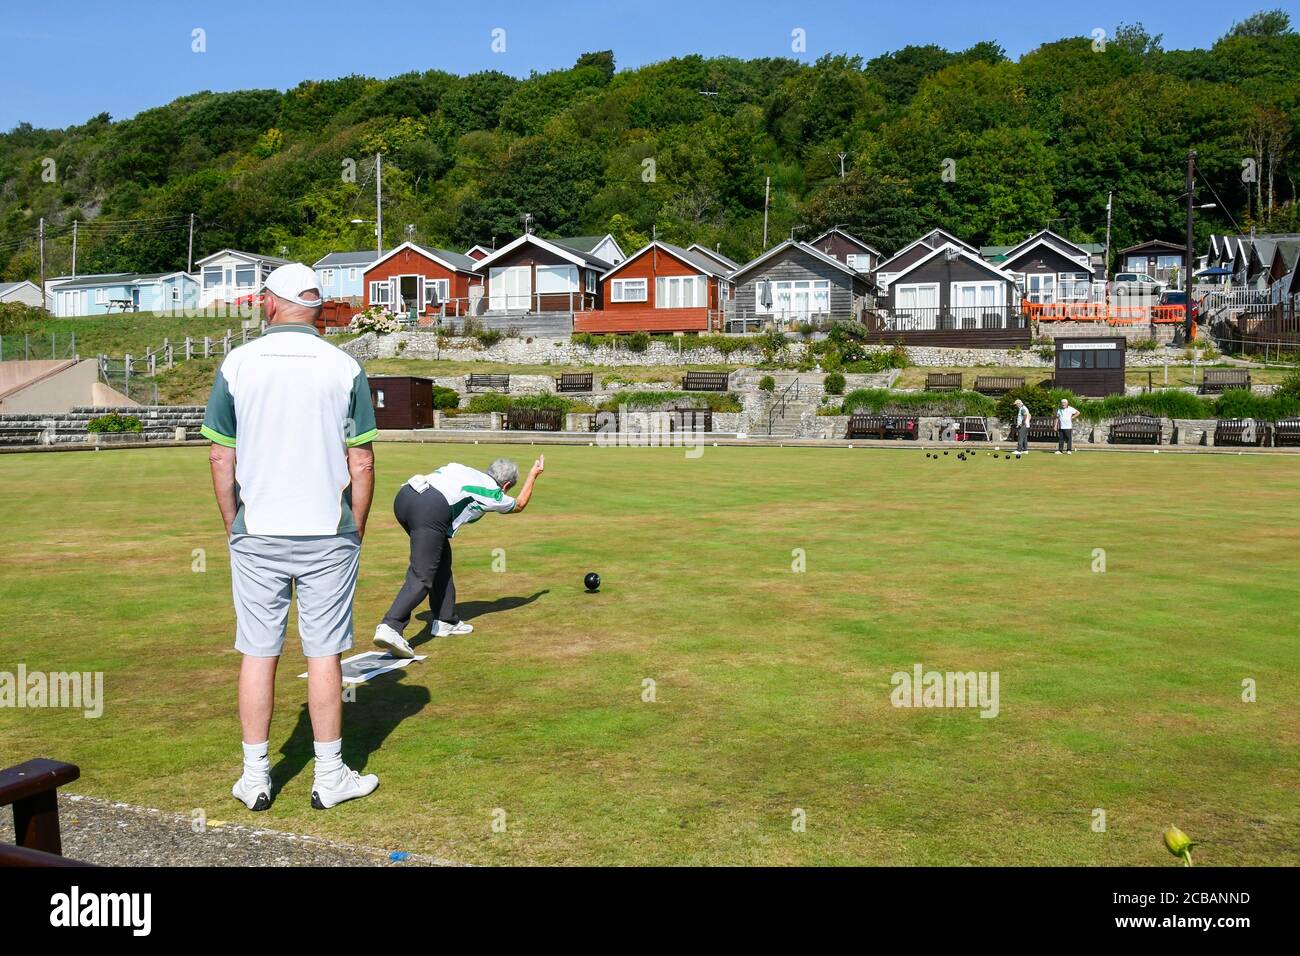 Lyme Regis, Dorset, UK.  12th August 2020.  UK Weather.  Members of the Lyme Regis Bowling Club enjoying a game on the bowls green at the seaside resort of Lyme Regis in Dorset on another scorching hot sunny day as the heatwave continues.  Picture Credit: Graham Hunt/Alamy Live News Stock Photo